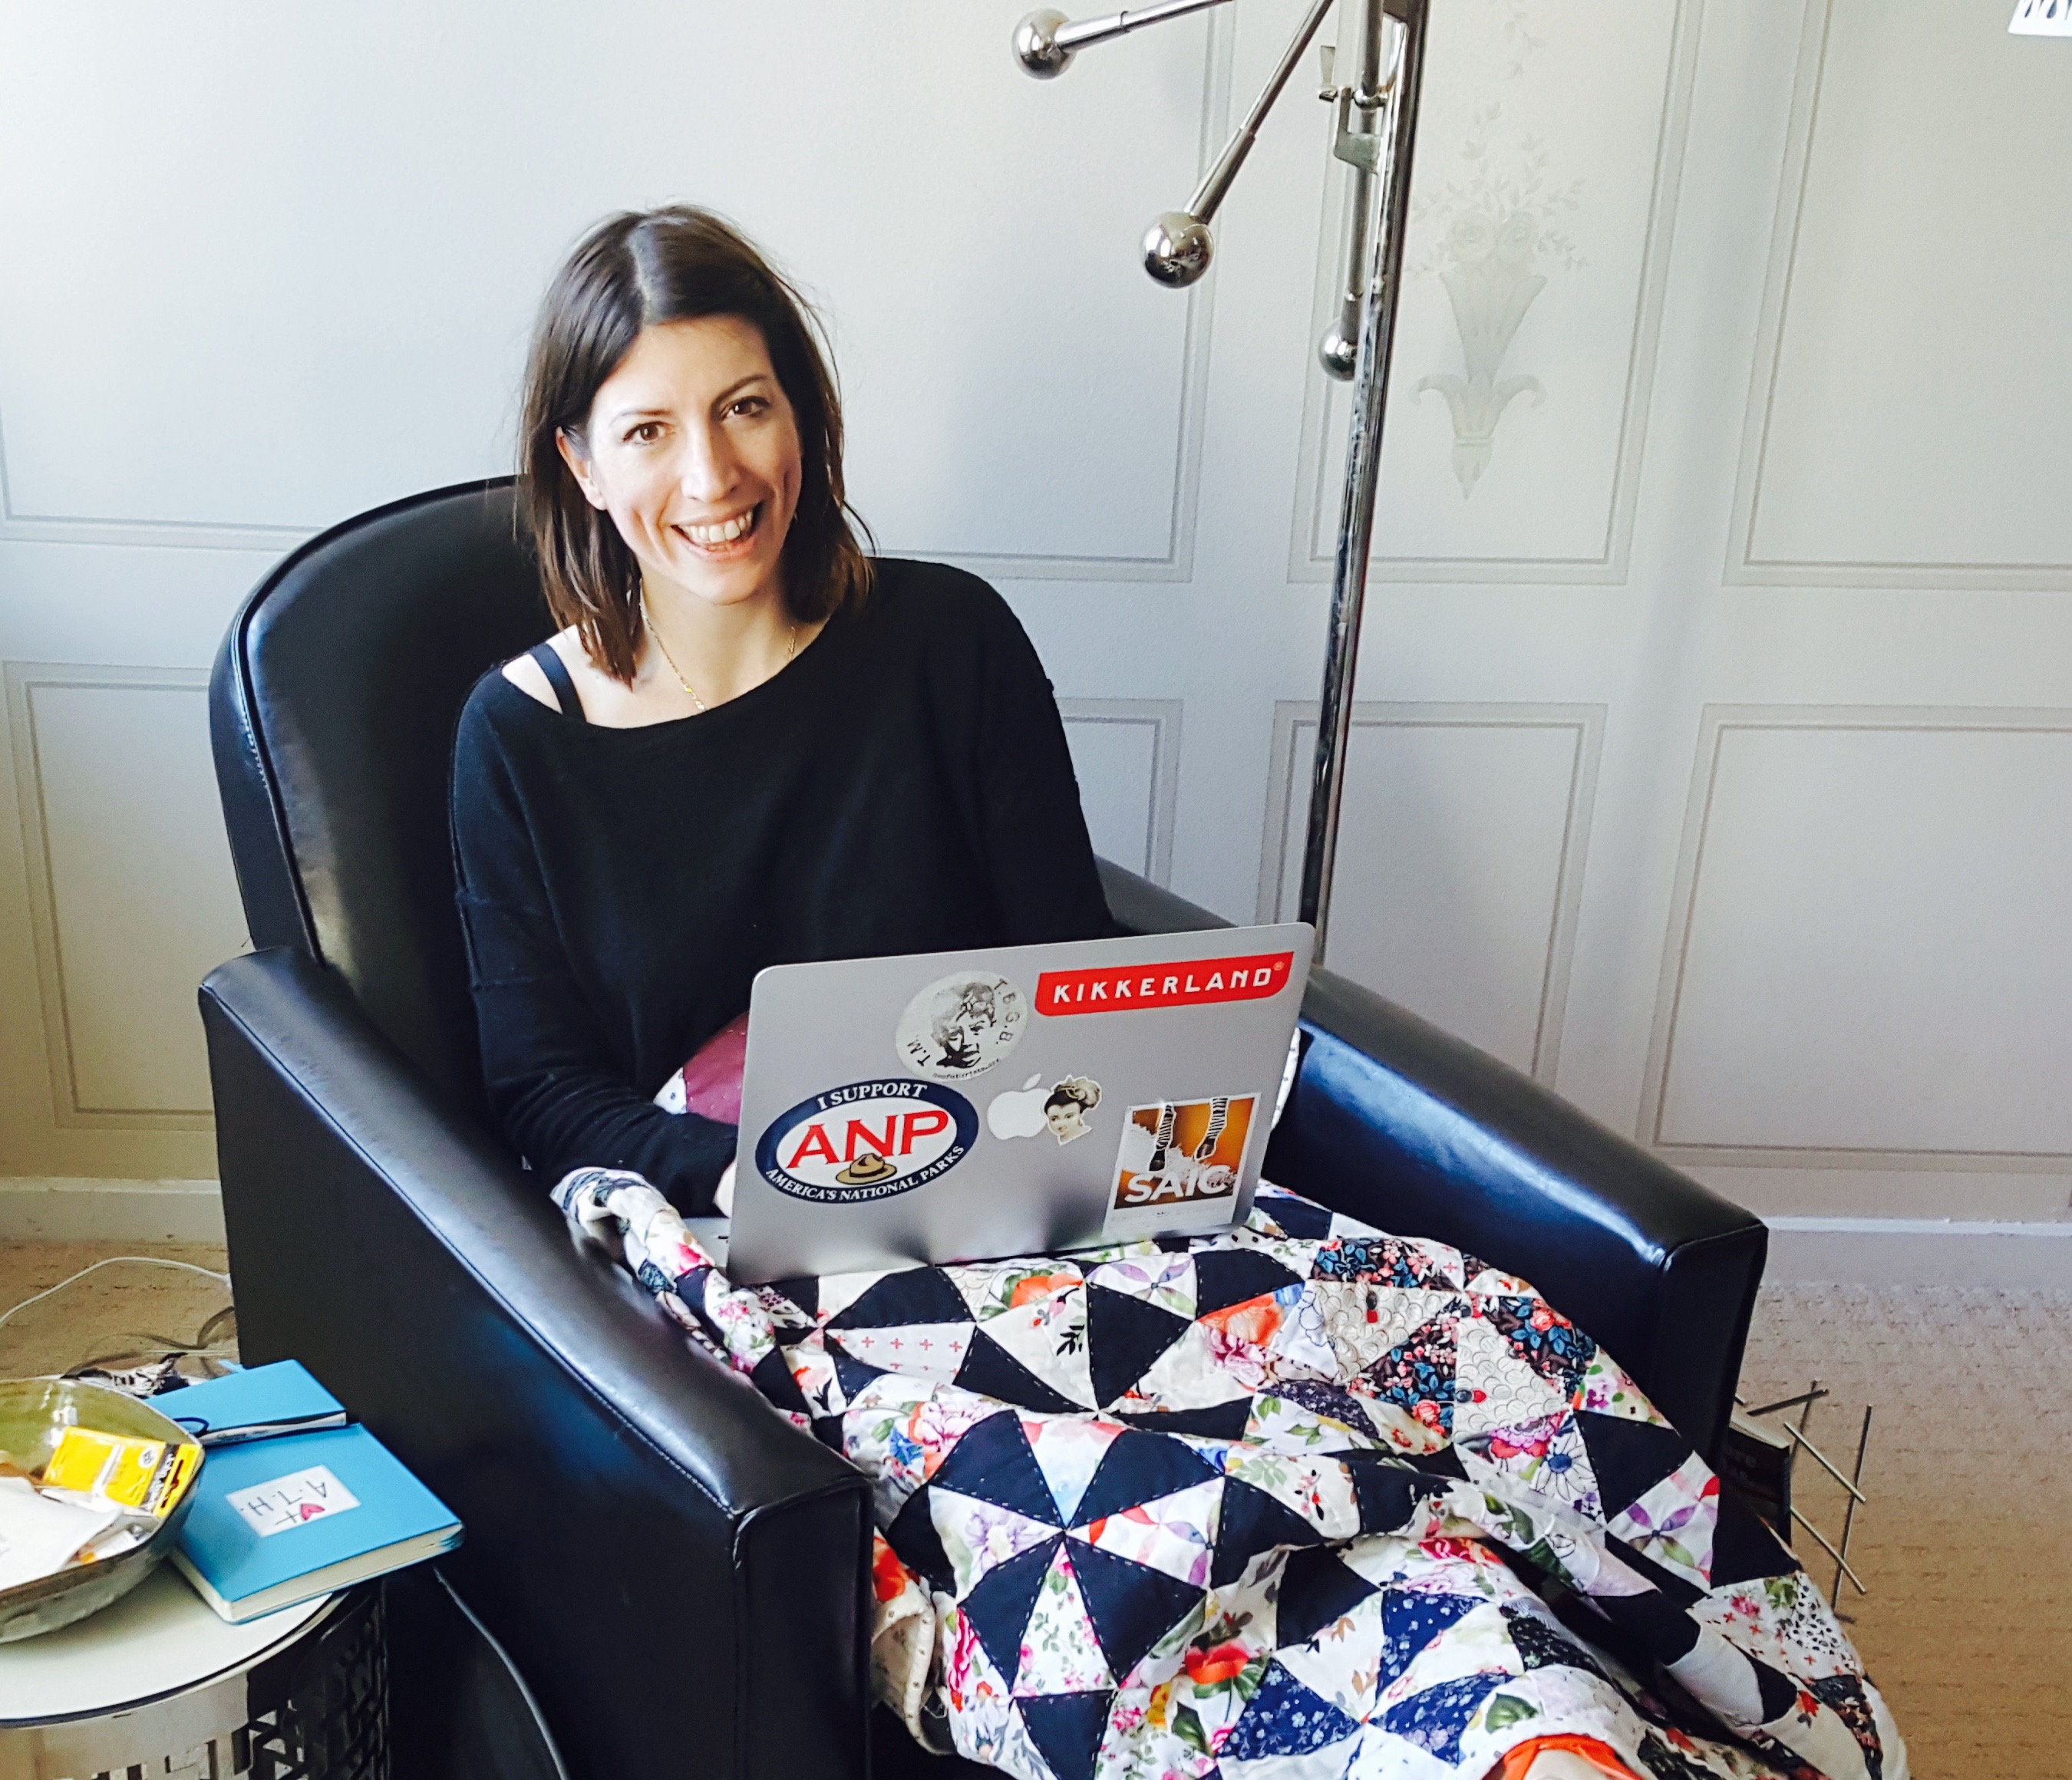 That's my hand-quilted "Larkin" quilt on my lap while I write this blog! Photo: Ebony Love.